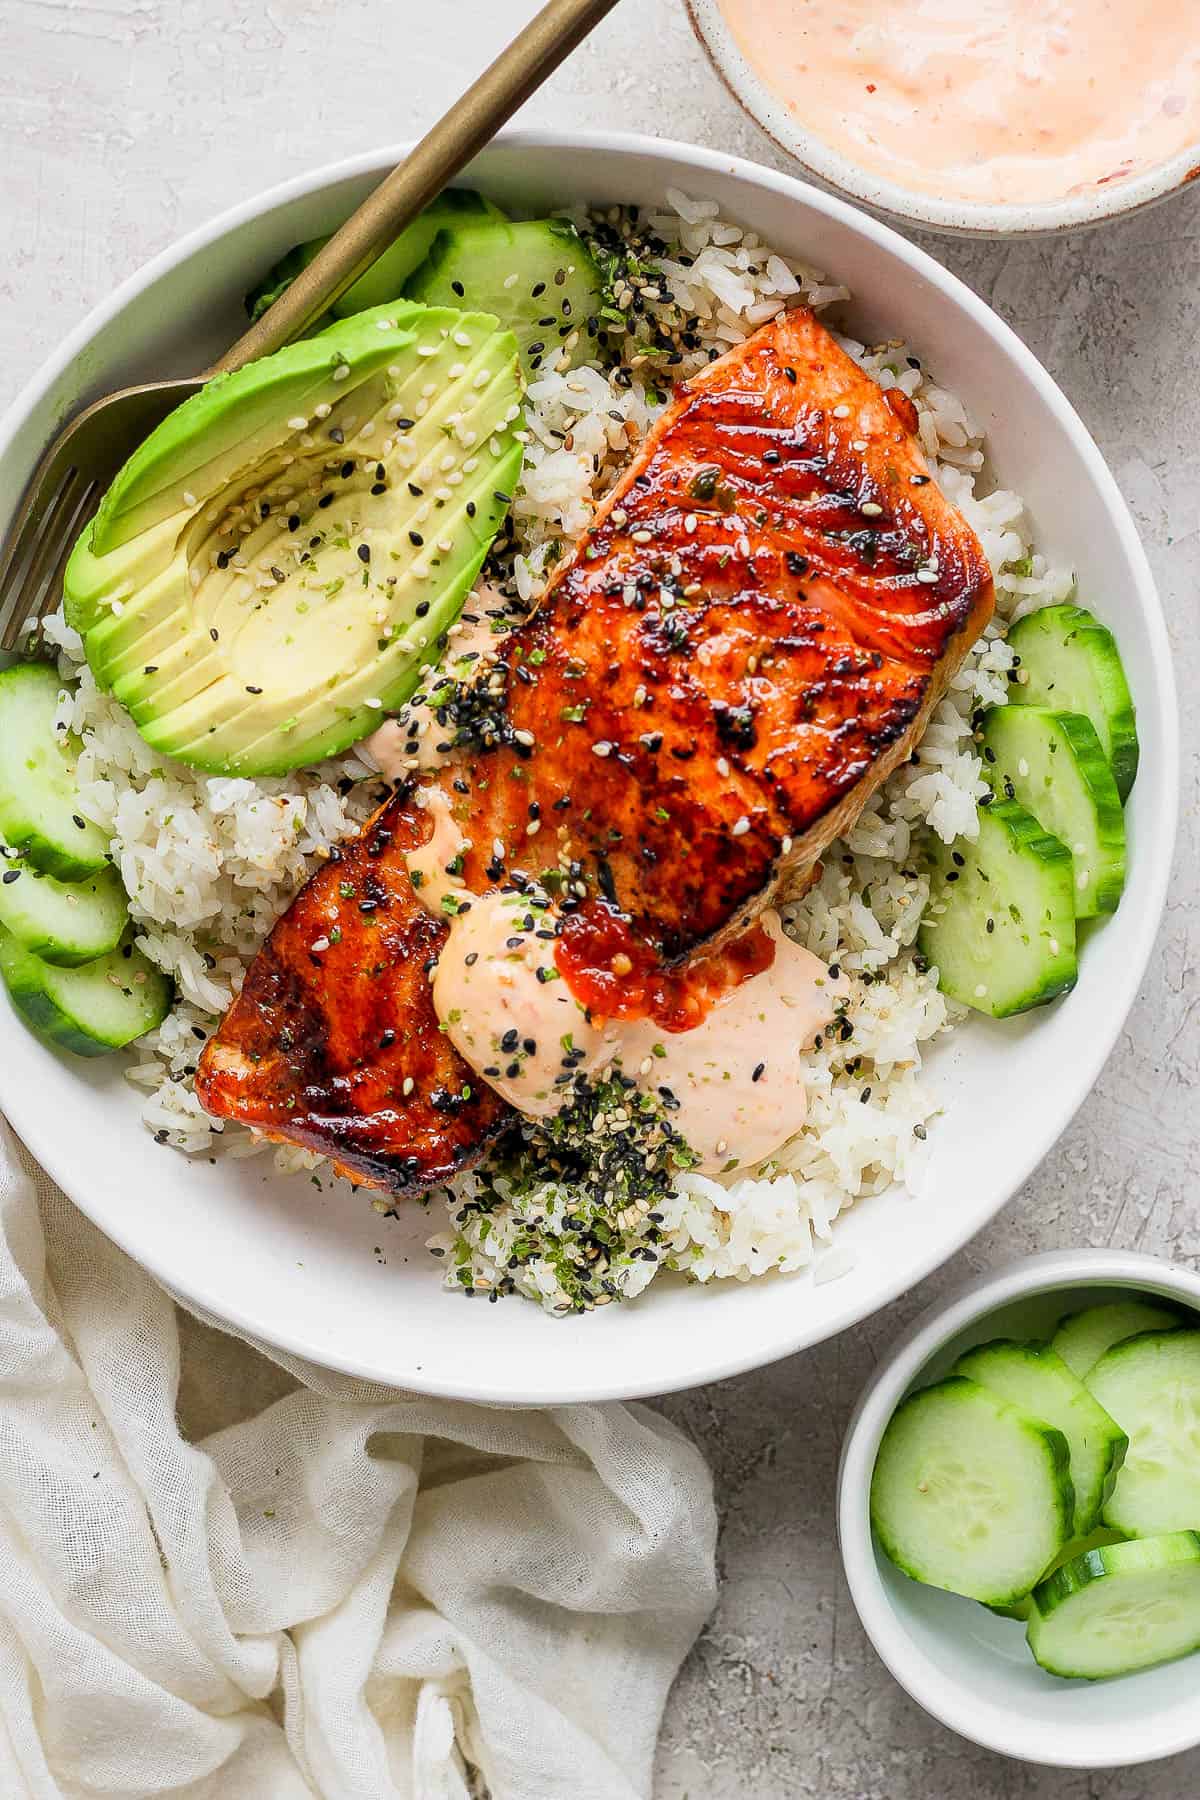 Baked salmon sushi bowl with salmon, cucumbers, sliced avocado, spicy mayo, and a salmon filet on top of rice. All garnished with furikake.